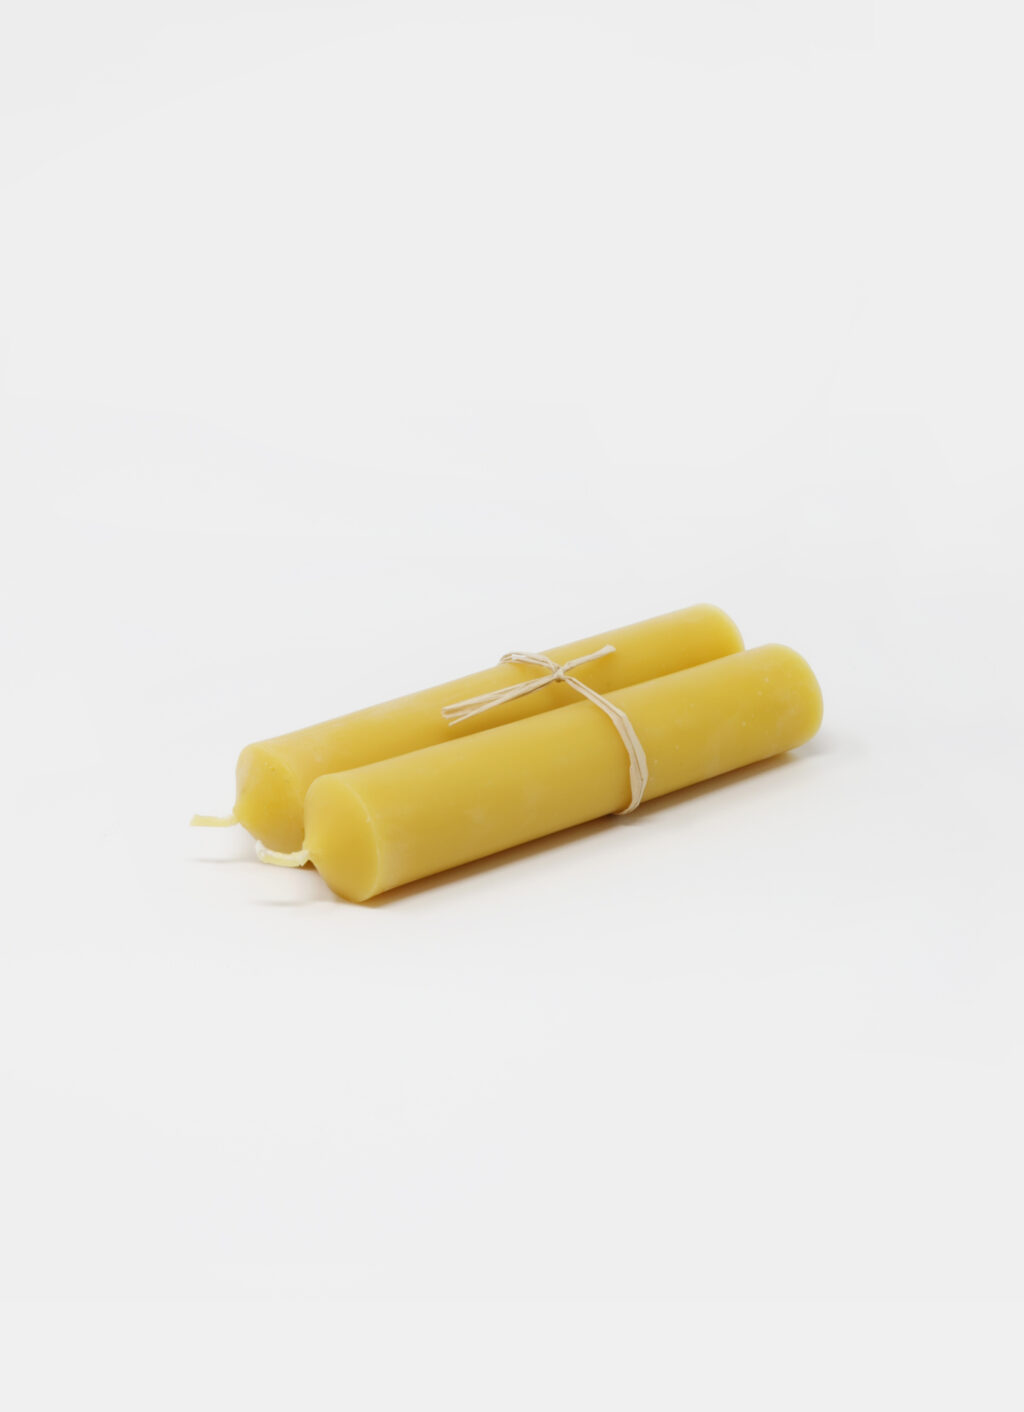 Five Bees Yard - Pure Beeswax Candle - Natural - H15cm - Set of two